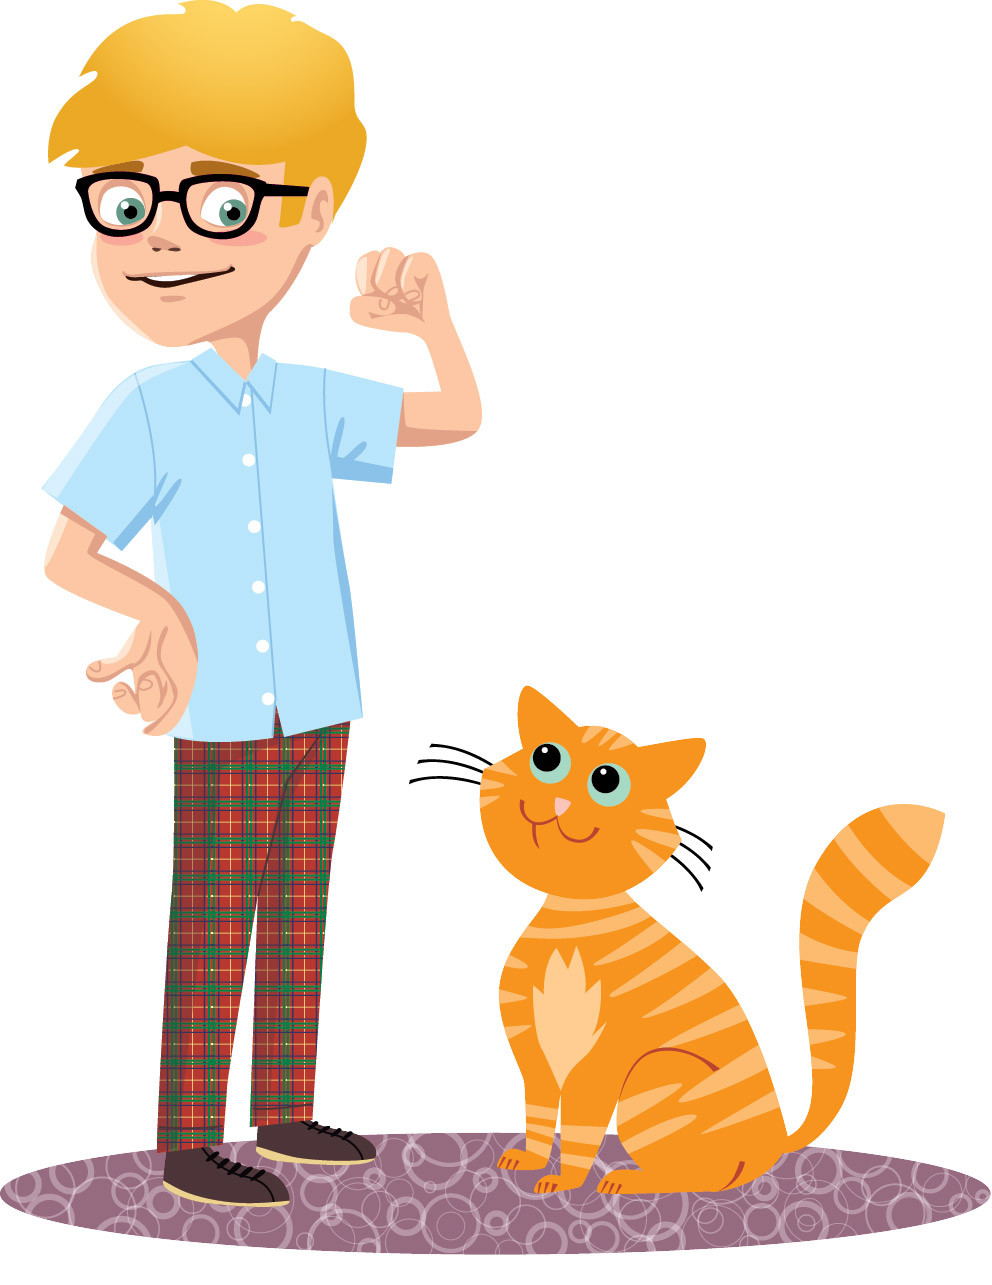 1-boy with cat